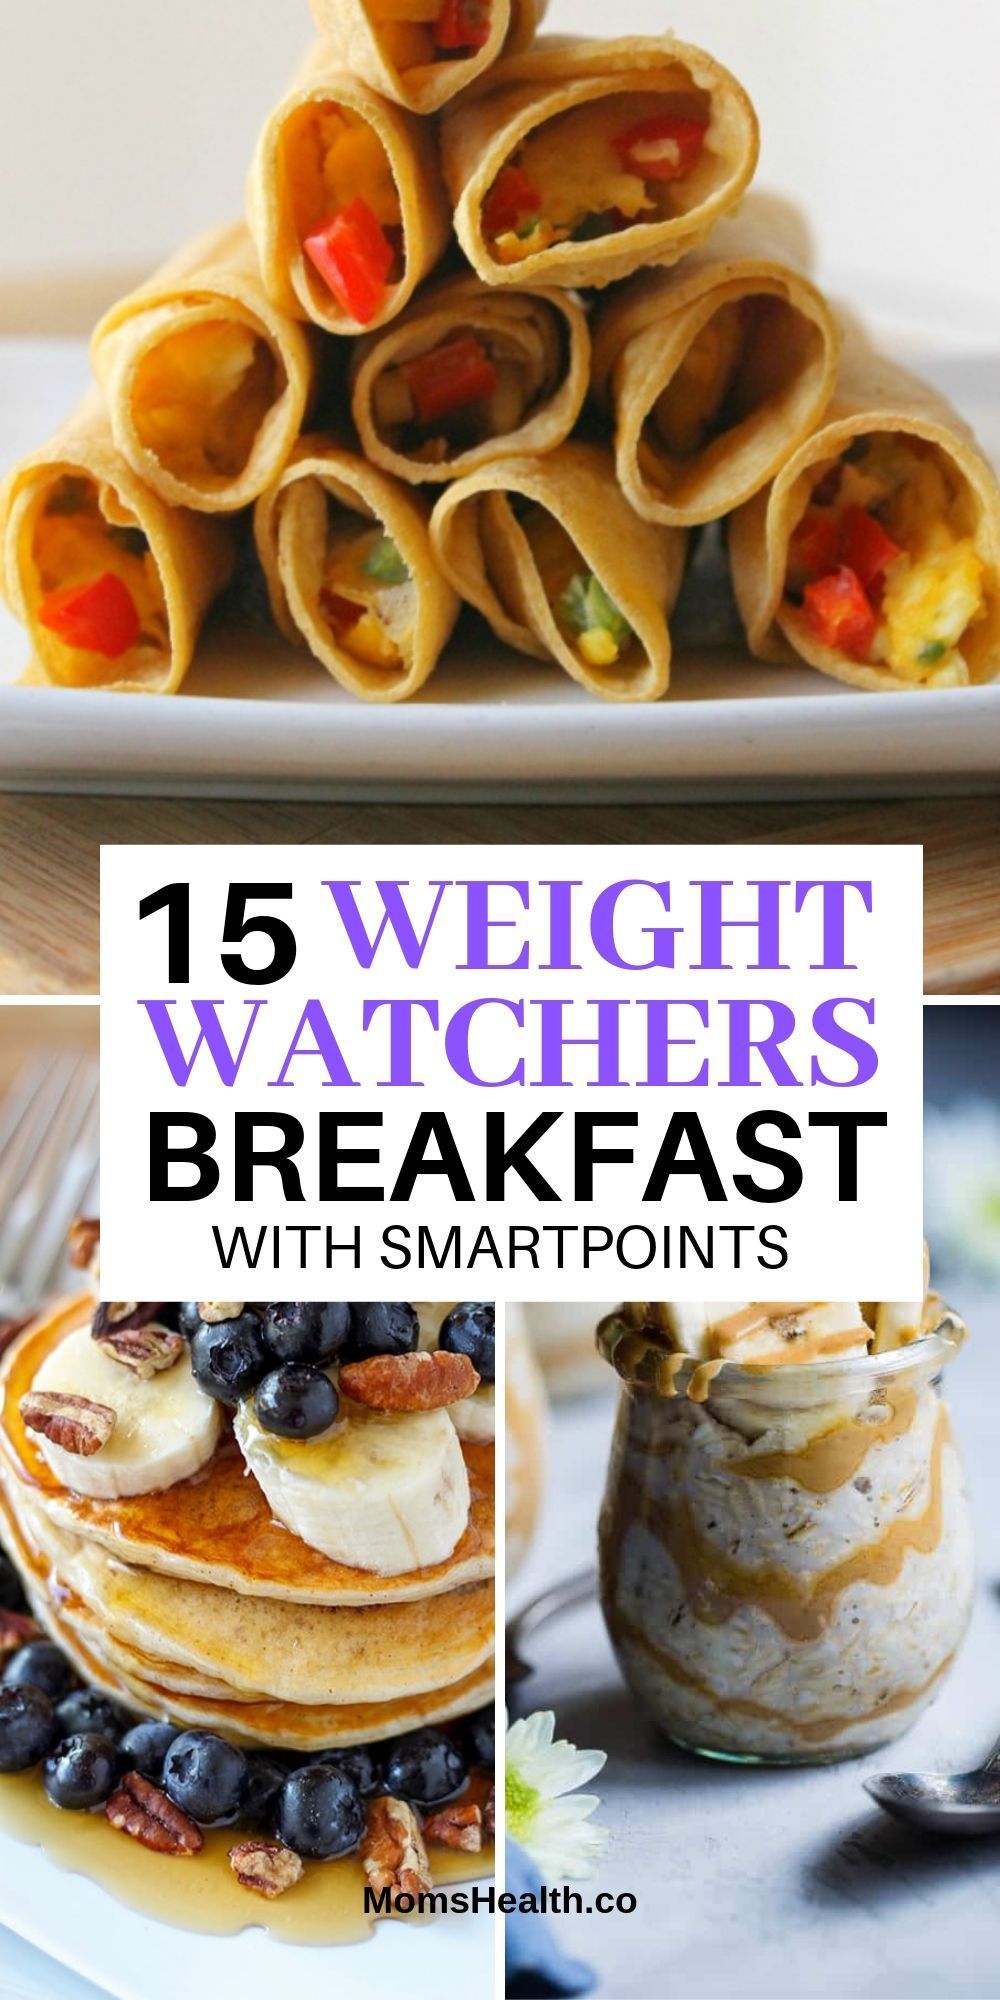 15 Best Weight Watchers Breakfast Recipes with SmartPoints On the Go -   18 diet Meals on the go ideas